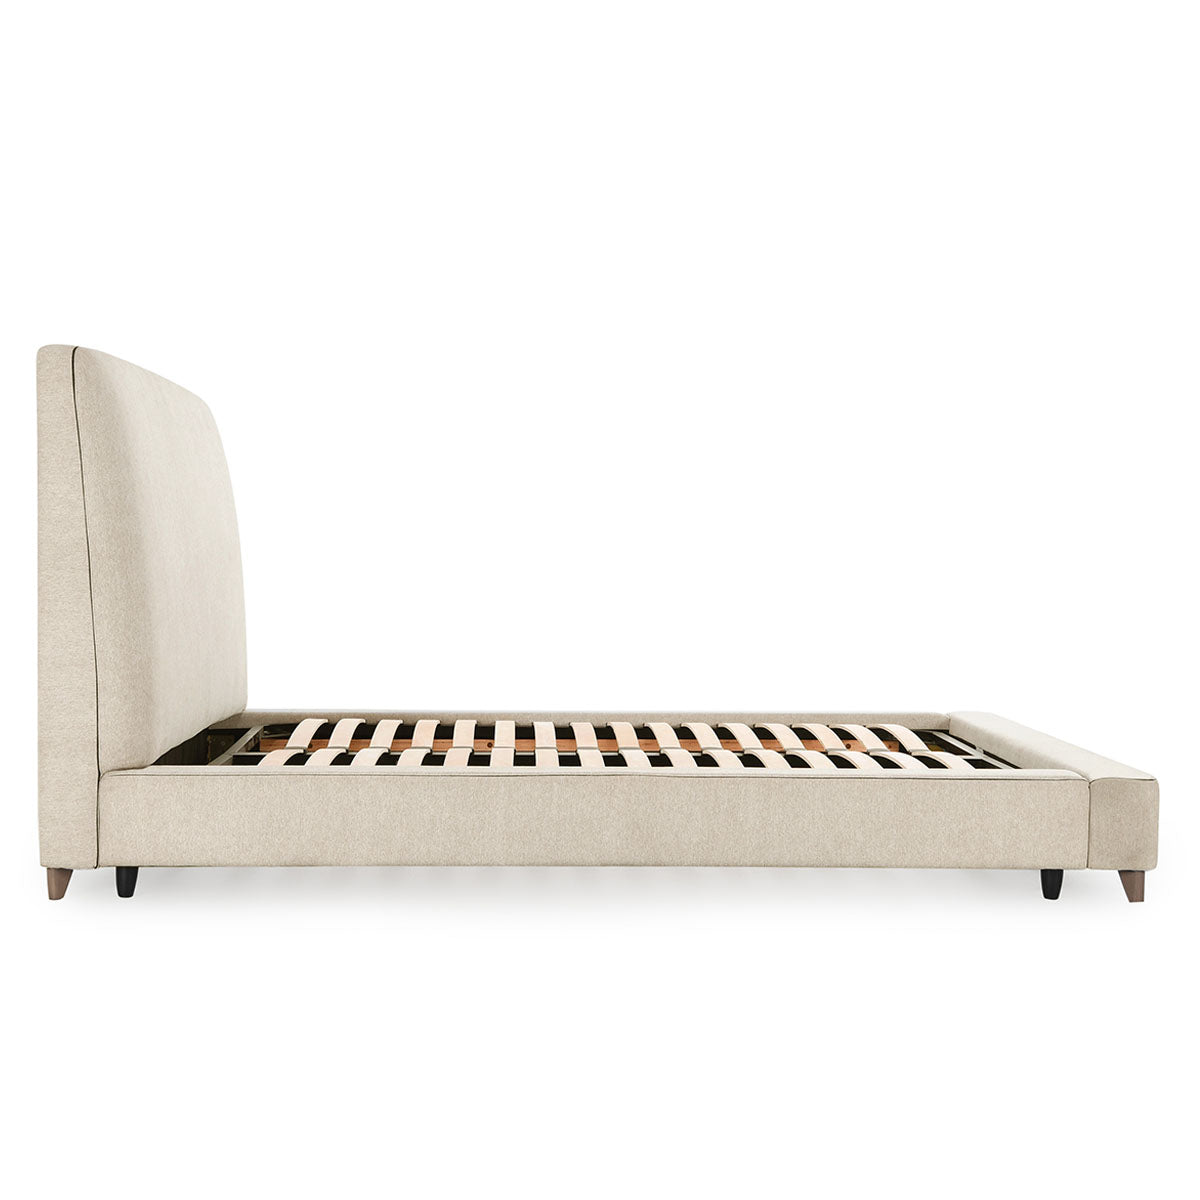 Tate Upholstered Queen Bed